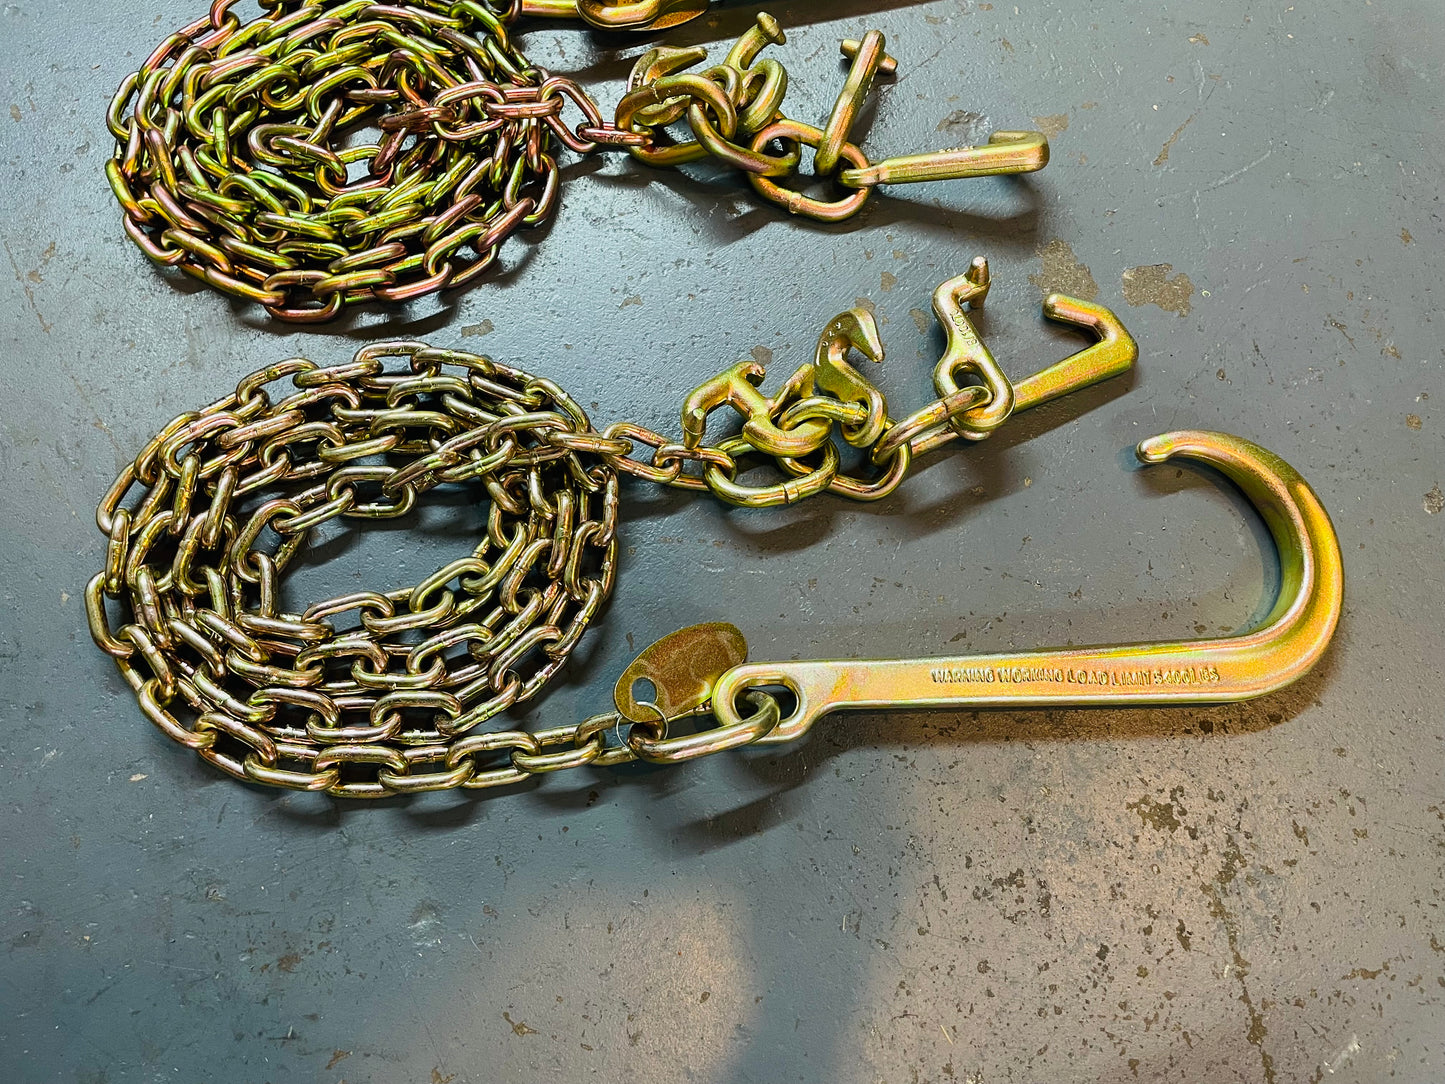 2 Pack of 5/16" X 8' Safety Chains with 15" J Hook and RTJ Cluster Hooks